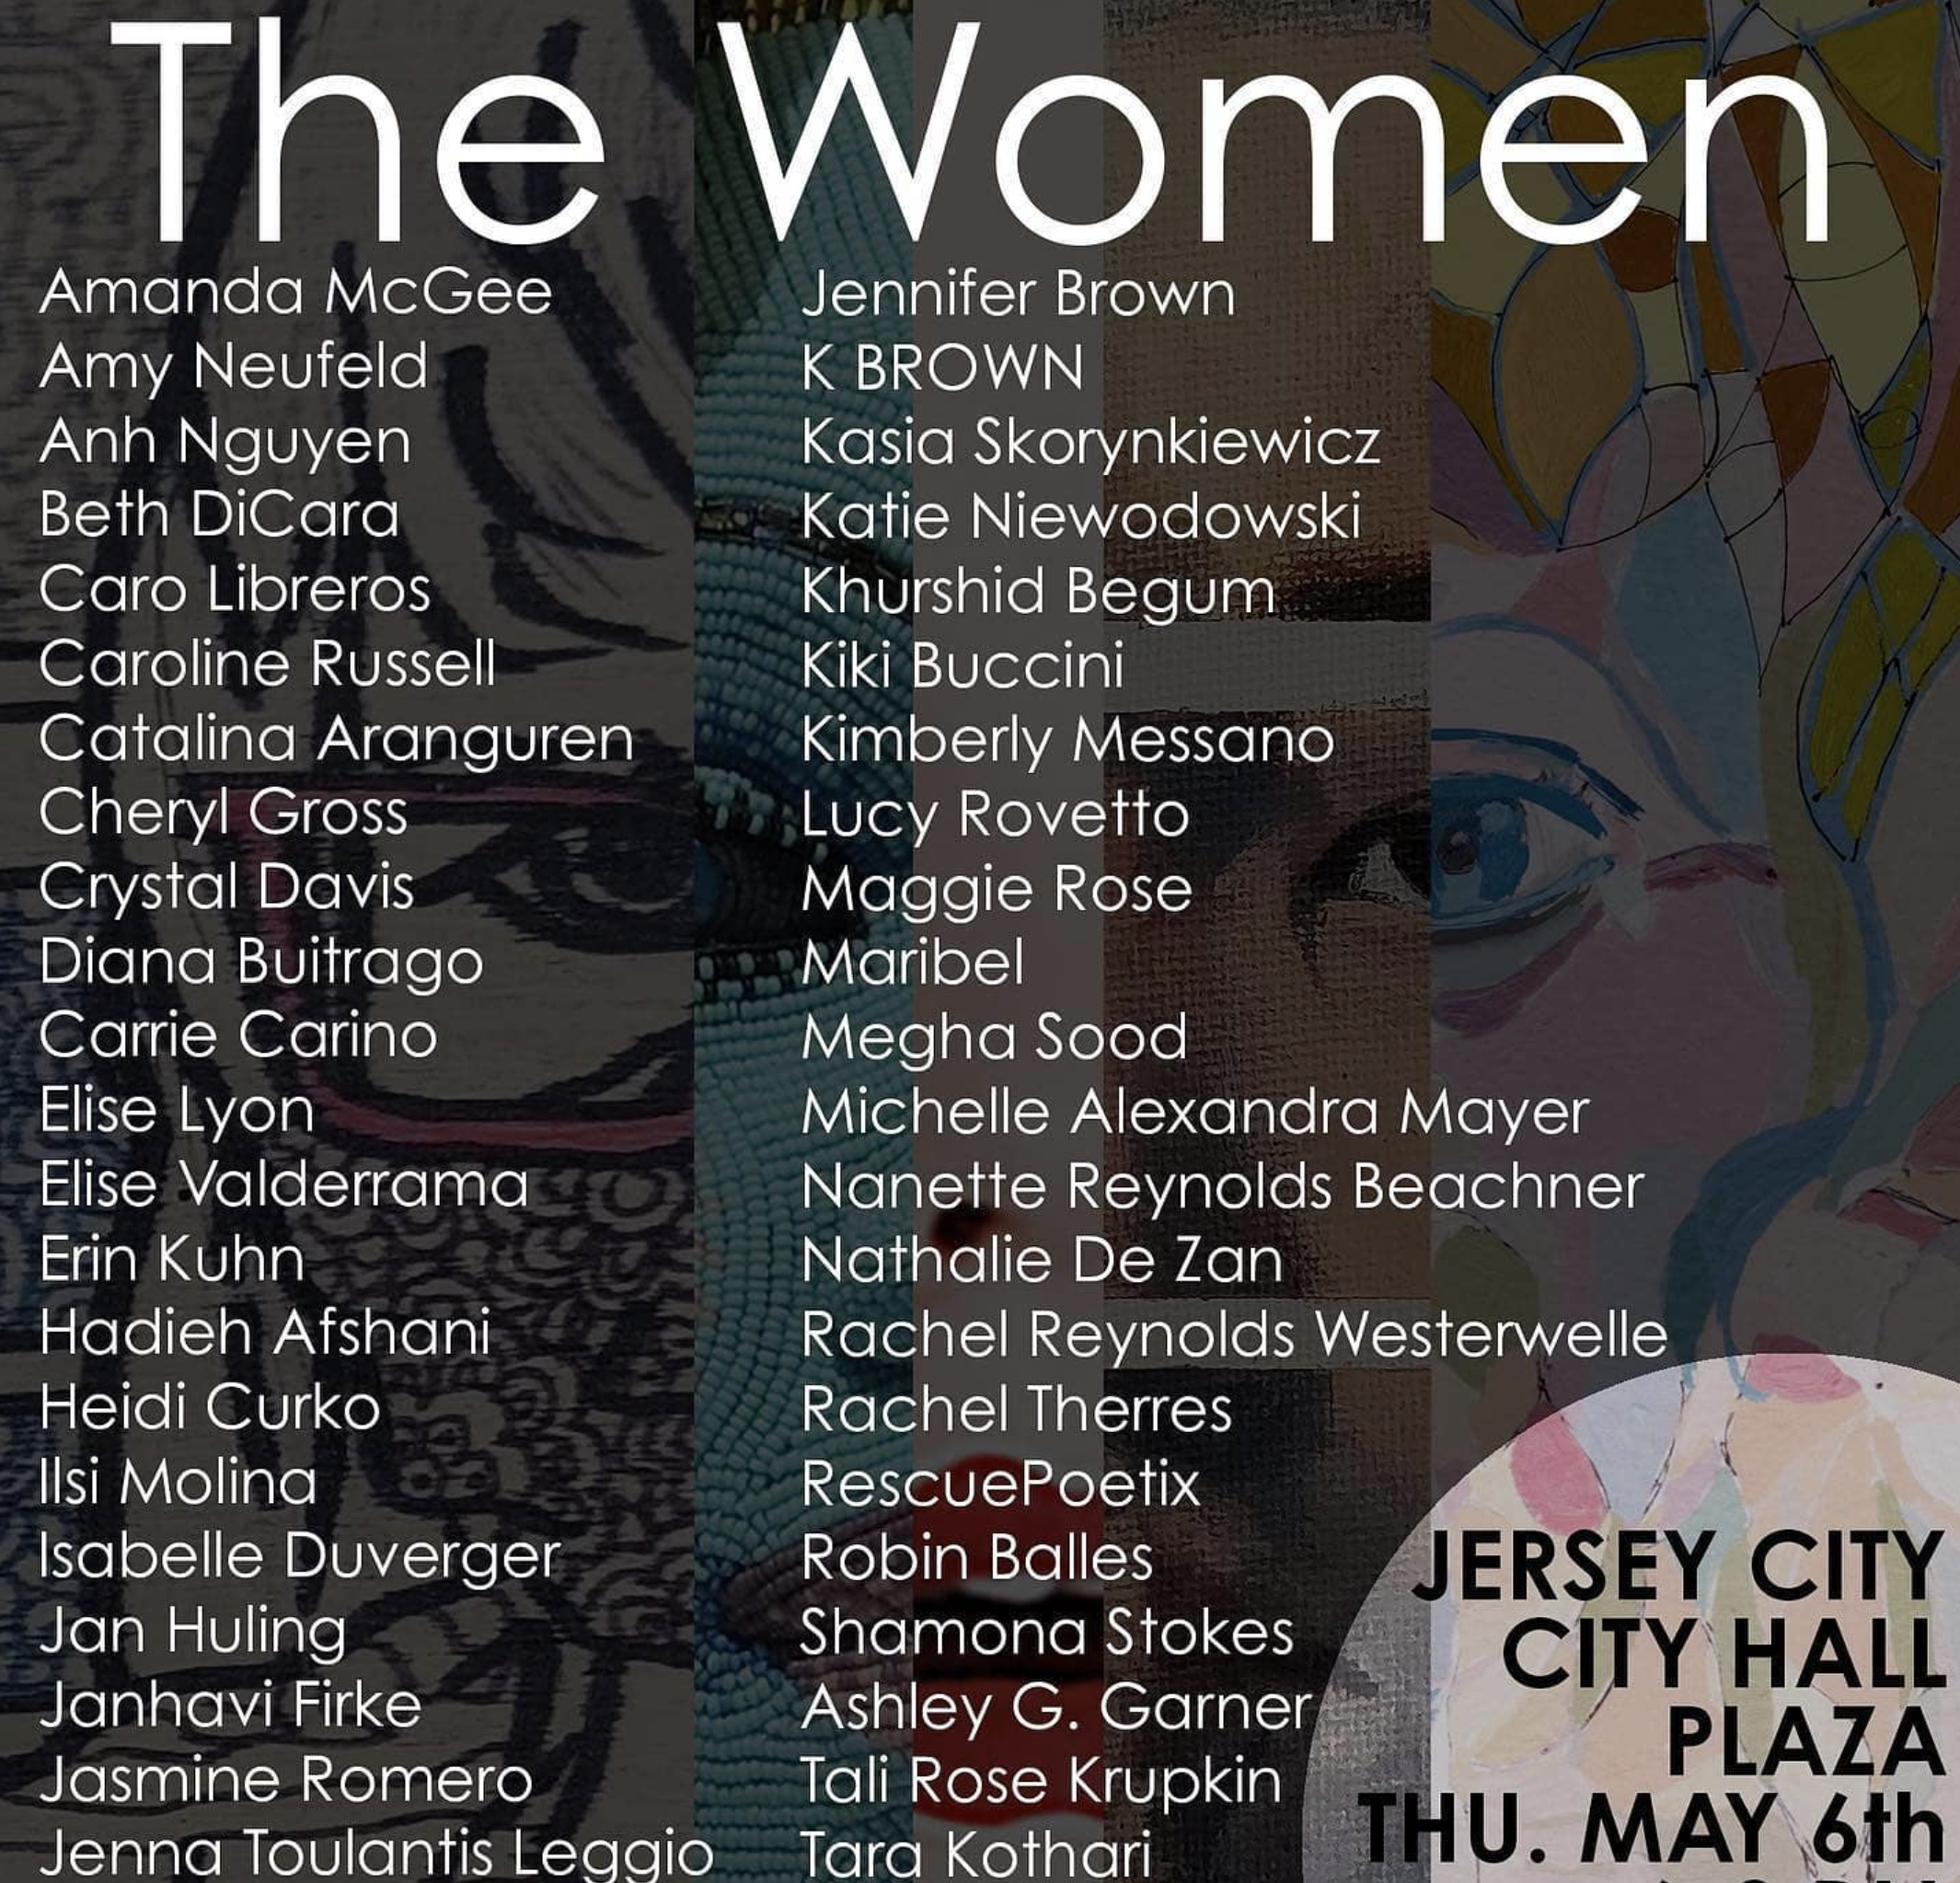 The Women - Group Show - Jersey City Hall Plaza